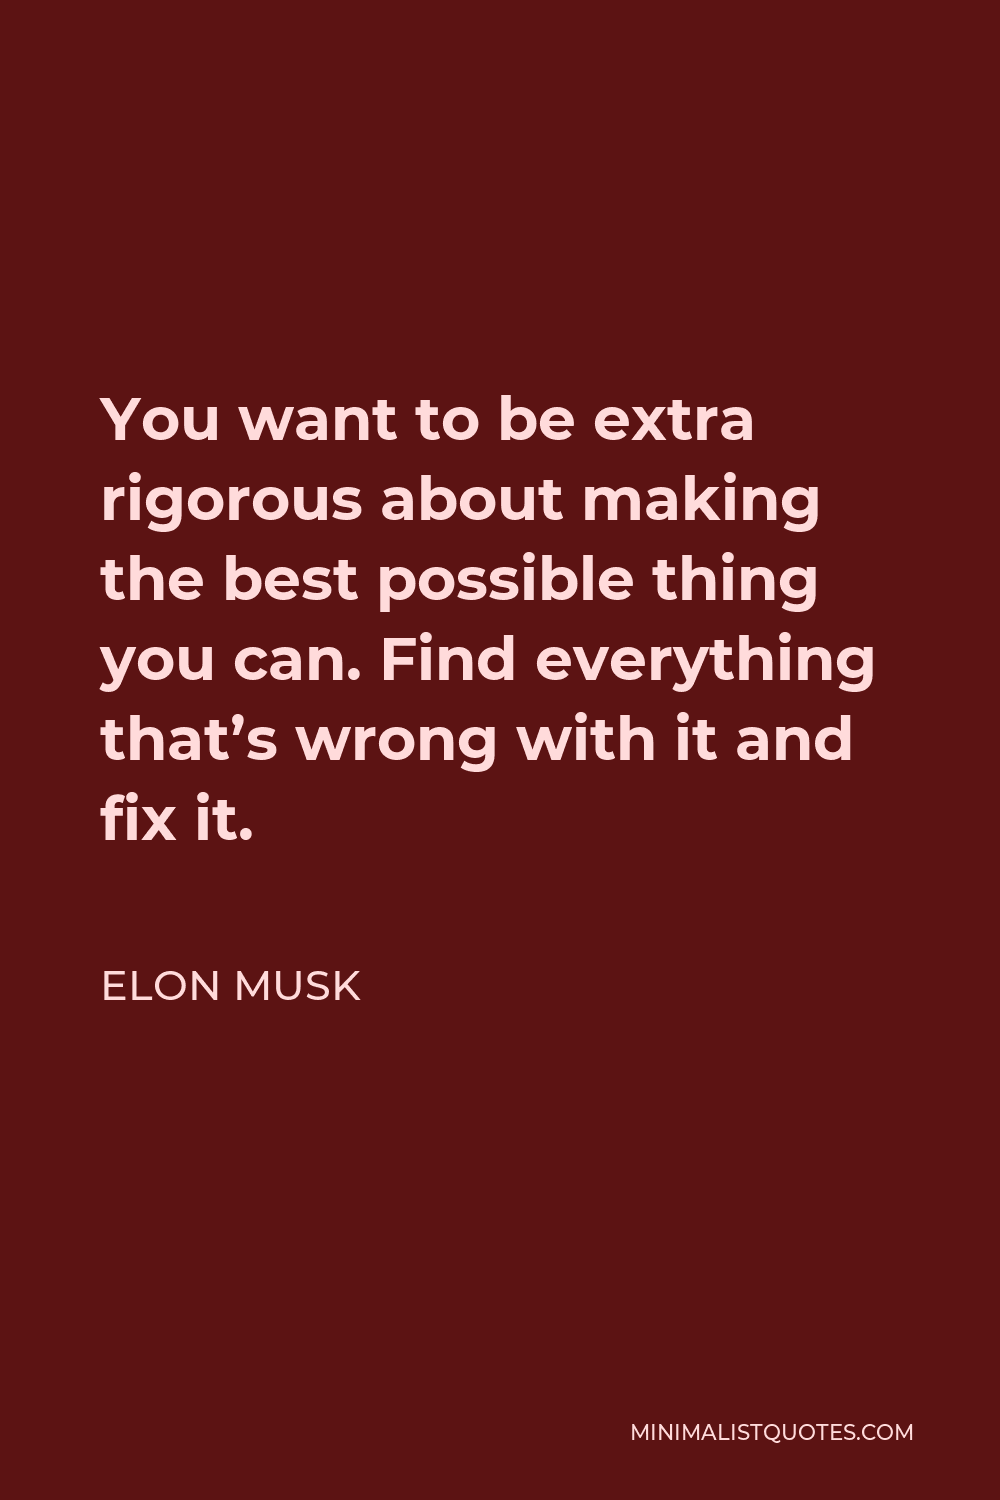 Elon Musk Quote - You want to be extra rigorous about making the best possible thing you can. Find everything that’s wrong with it and fix it.